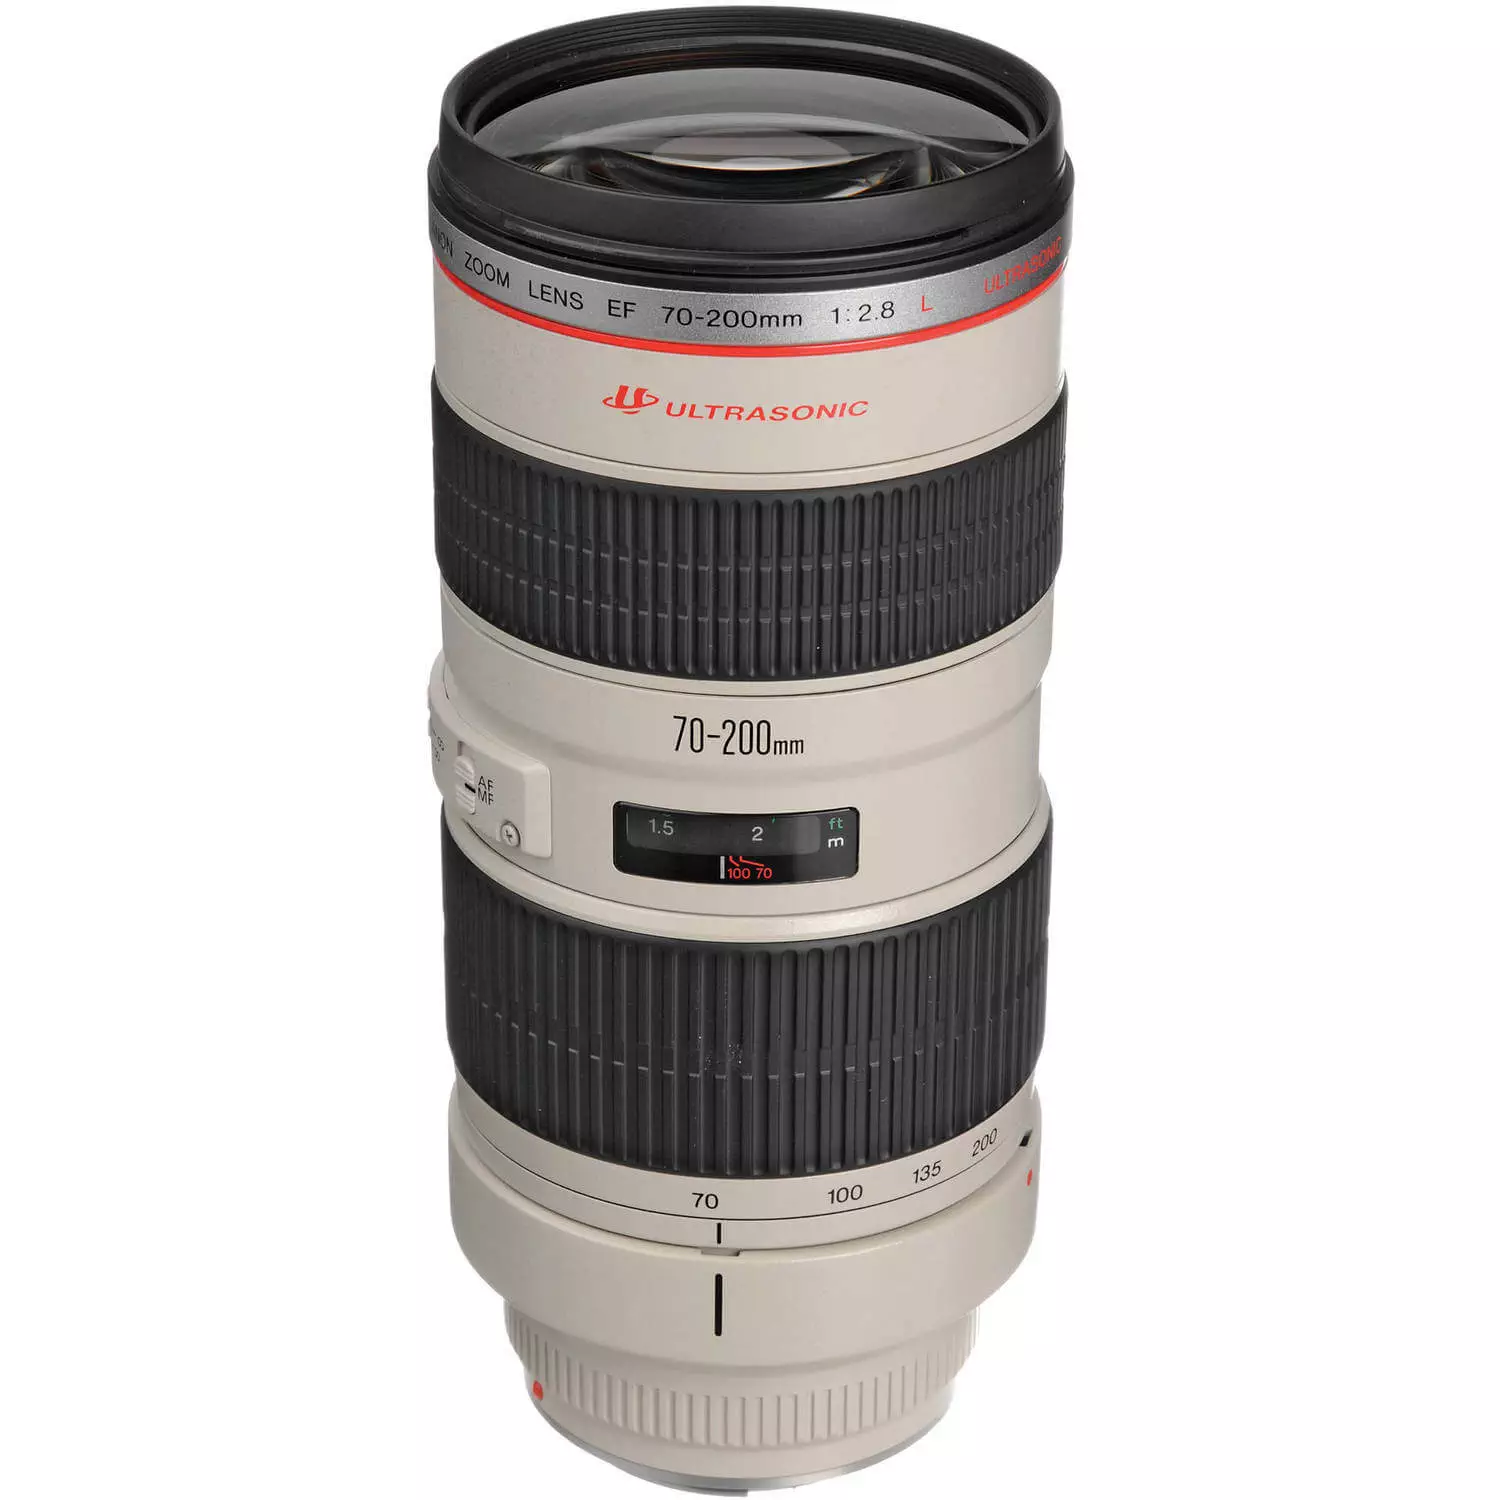 A truly versatile lens, the EF 70-200mm f/2.8L USM is a Canon L-series zoom spanning a flexible range of telephoto focal lengths. Beyond its portrait-length to medium tele range, this lens is also characterized by its bright f/2.8 constant maximum aperture, which affords notable control over depth of field and benefits working in challenging lighting conditions. Supporting the versatility is a sophisticated optical design, which utilizes four ultra-low dispersion elements to suppress color fringing and chromatic aberrations throughout the zoom range for high clarity. Also, a Super Spectra coating has been applied to help reduce lens flare and ghosting for greater contrast and color neutrality.  Complementing its optical assets, this 70-200mm f/2.8 also sports a ring-type USM and internal focusing mechanism for quick, quiet, and accurate autofocus performance, as well as full-time manual focus override. Additionally, a removable rotating tripod collar is included for stable use of the lens atop a tripod or monopod.  Versatile telephoto zoom is designed for full-frame Canon EF-mount DSLRs, however can also be used with APS-C models where it provides a 112-320mm equivalent focal length range. Bright constant f/2.8 maximum aperture affords consistent performance throughout the zoom range and offers notable control over depth of field for working with selective focus techniques. Four ultra-low dispersion glass elements reduce color fringing and chromatic aberrations for high clarity and color fidelity. Super Spectra coating has been applied to individual elements to minimize ghosting and flare for greater contrast and color neutrality when working in strong lighting conditions. A ring-type Ultrasonic Motor (USM), along with an internal focusing system, is employed to deliver fast, precise, and quiet autofocus performance as well as full-time manual focus override. Focus Limiter switch lets you constrain the focusing to two different ranges to suit different applications: 4.9